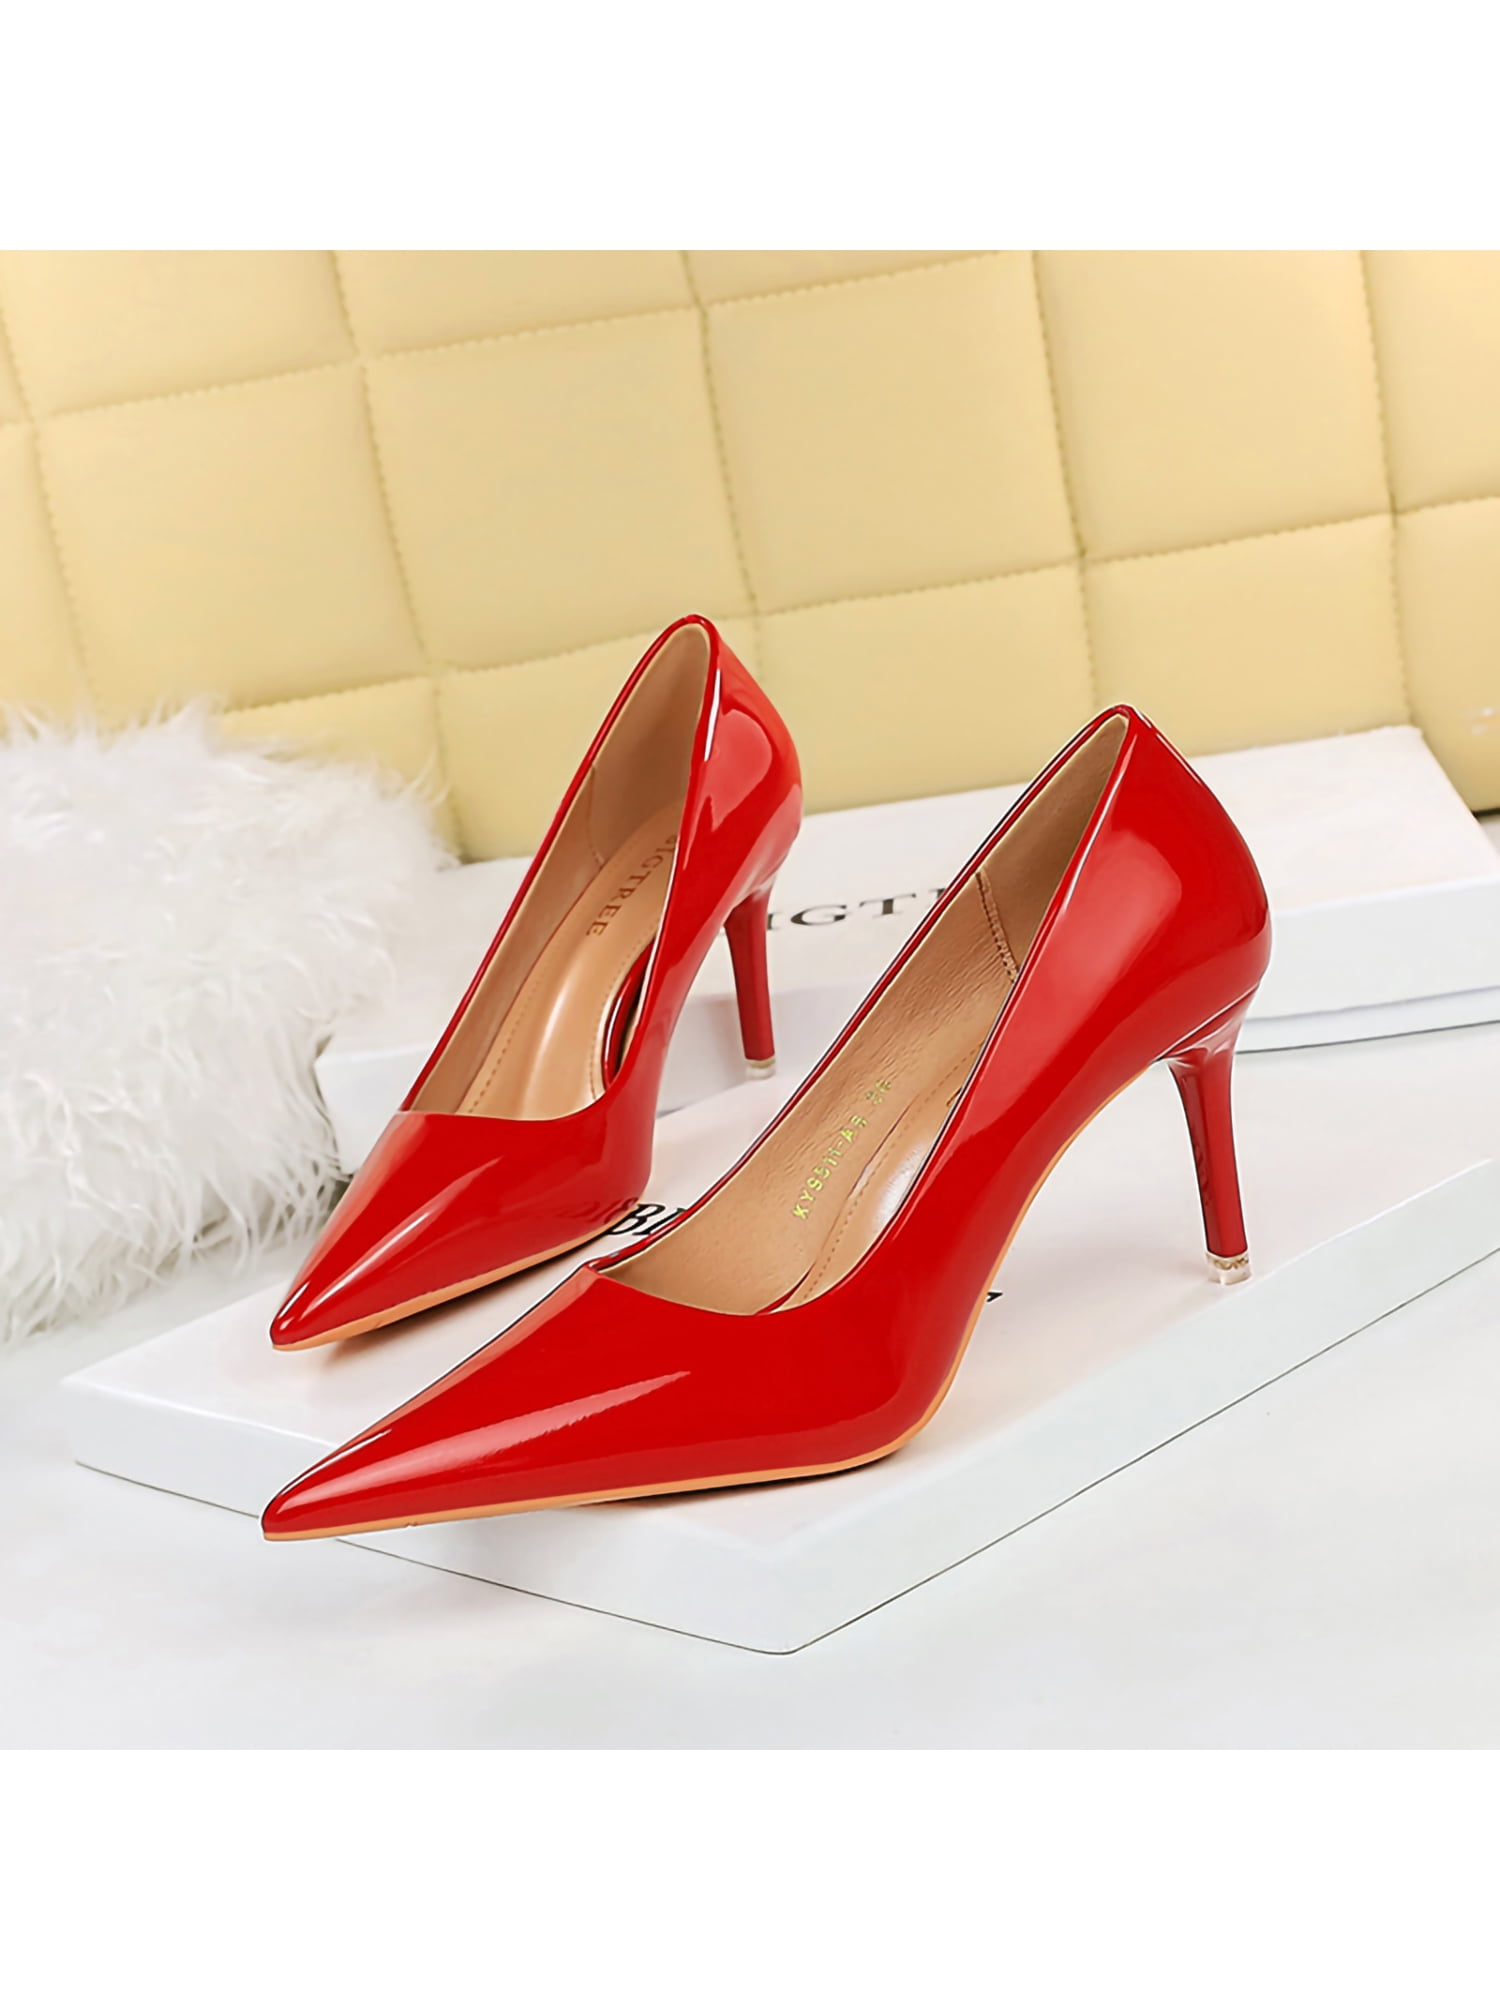 Shop Generic （Red）Women's Shoes Heeled Pumps Stiletto Heels Pointed Toe  Elegant Wedding Dress Office High for Men Big Size on Offer DON Online |  Jumia Ghana